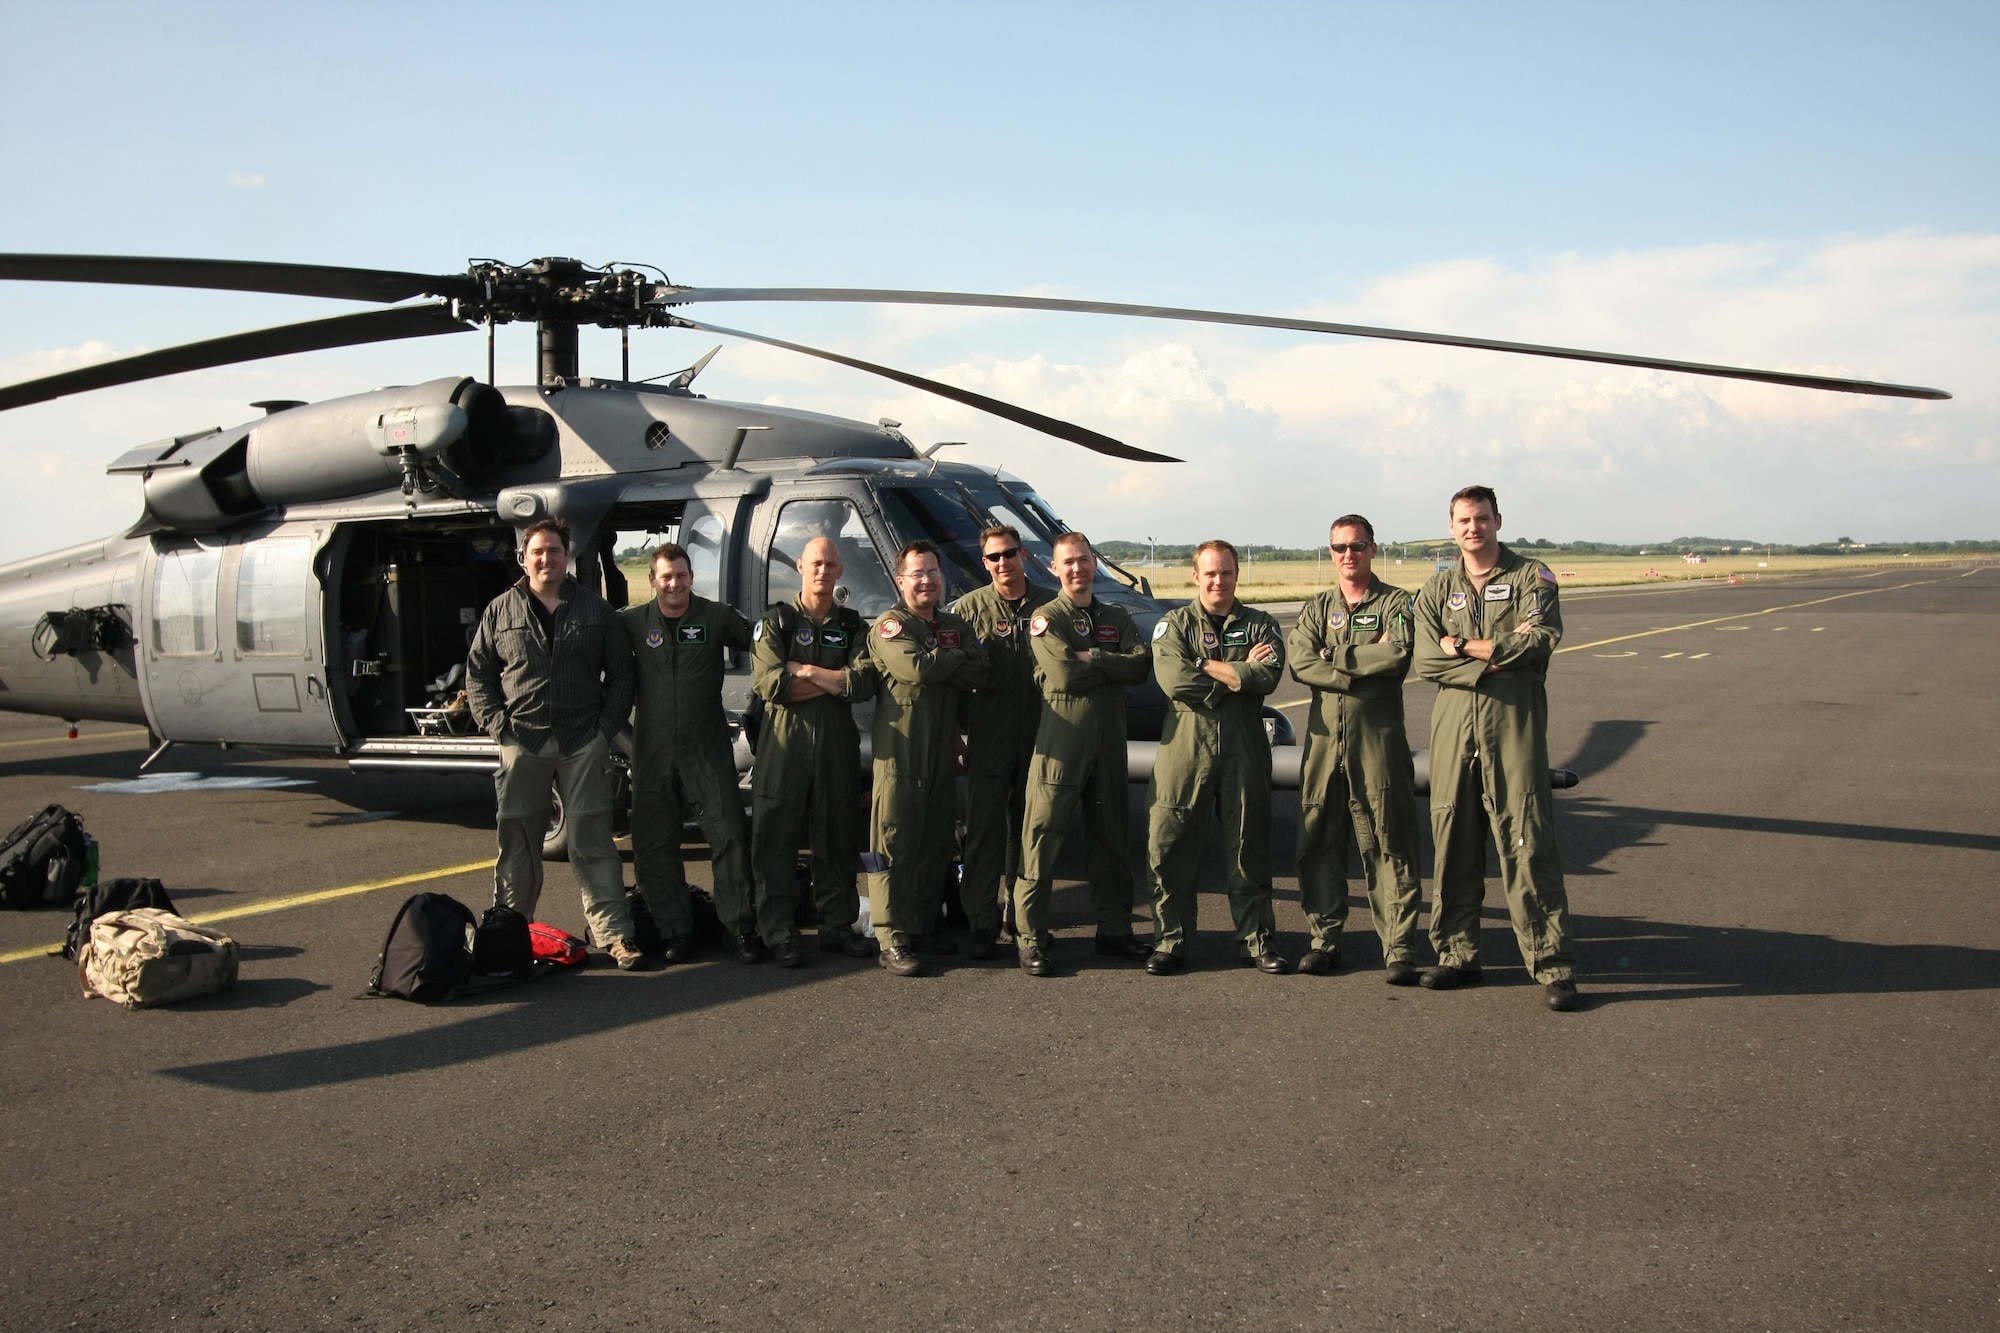 Airmen of the 56th Rescue Squadron at RAF Lakenheath, England, pose in front of one of the two HH-60G Pave Hawks used in a rescue mission off the West coast of Ireland, June 26. The pararescue specialists and crew hoisted a sailor in need of emergent medical care onto their helicopter from the cargo ship, Pascha. The man was experiencing severe abdominal pain, requiring immediate medical evacuation. Two additional U.S. Air Force aircraft, a KC-135R Stratotanker from the 100th Air Refueling Wing and a MC-130P Combat Shadow from the 352nd Special Operations Group -- both from nearby RAF Mildenhall -- supported the operation for refueling and communication purposes. A Nimrod, search and rescue aircraft, from the United Kingdom also played a critical role in the operation, providing real time communication and coordination between the ship and USAF aircraft. The patient was delivered to an awaiting ambulance in Shannon, Ireland, and is in stable condition. (U.S. Air Force photo / Senior Airmen Michael Barber)